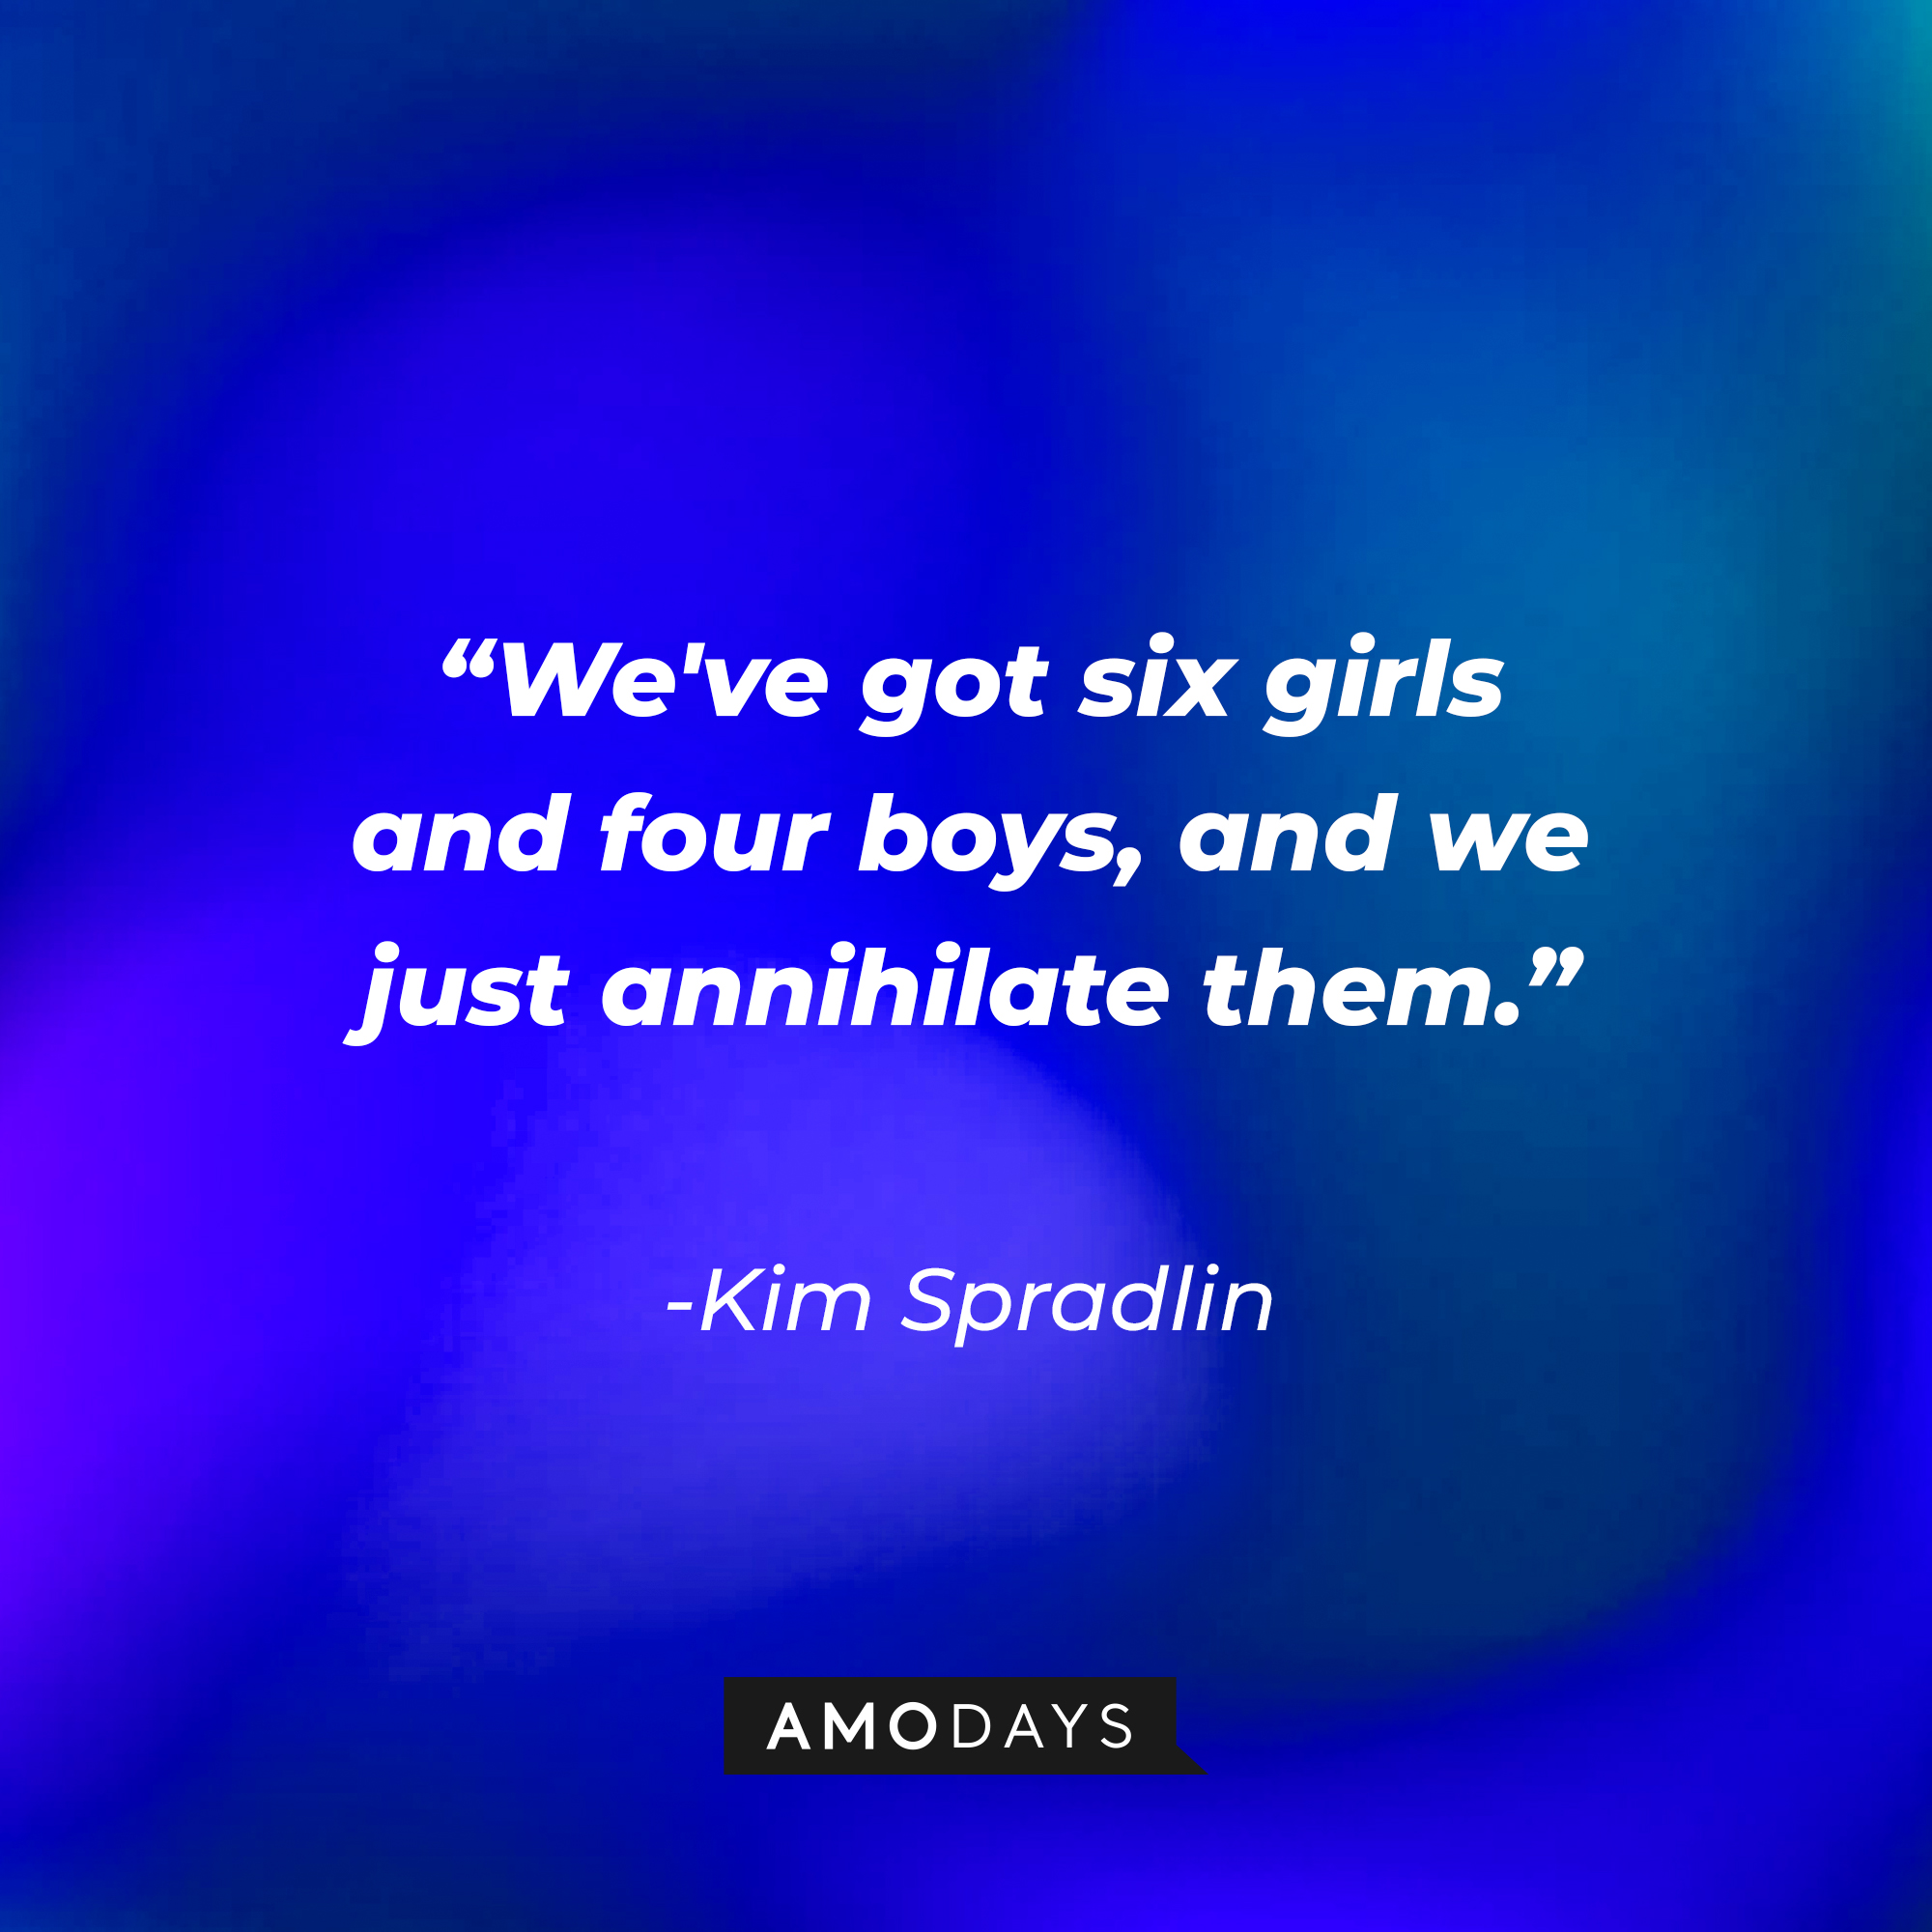 Kim Spradlin’s quote:“We've got six girls and four boys, and we just annihilate them.”│ Source: AmoDays